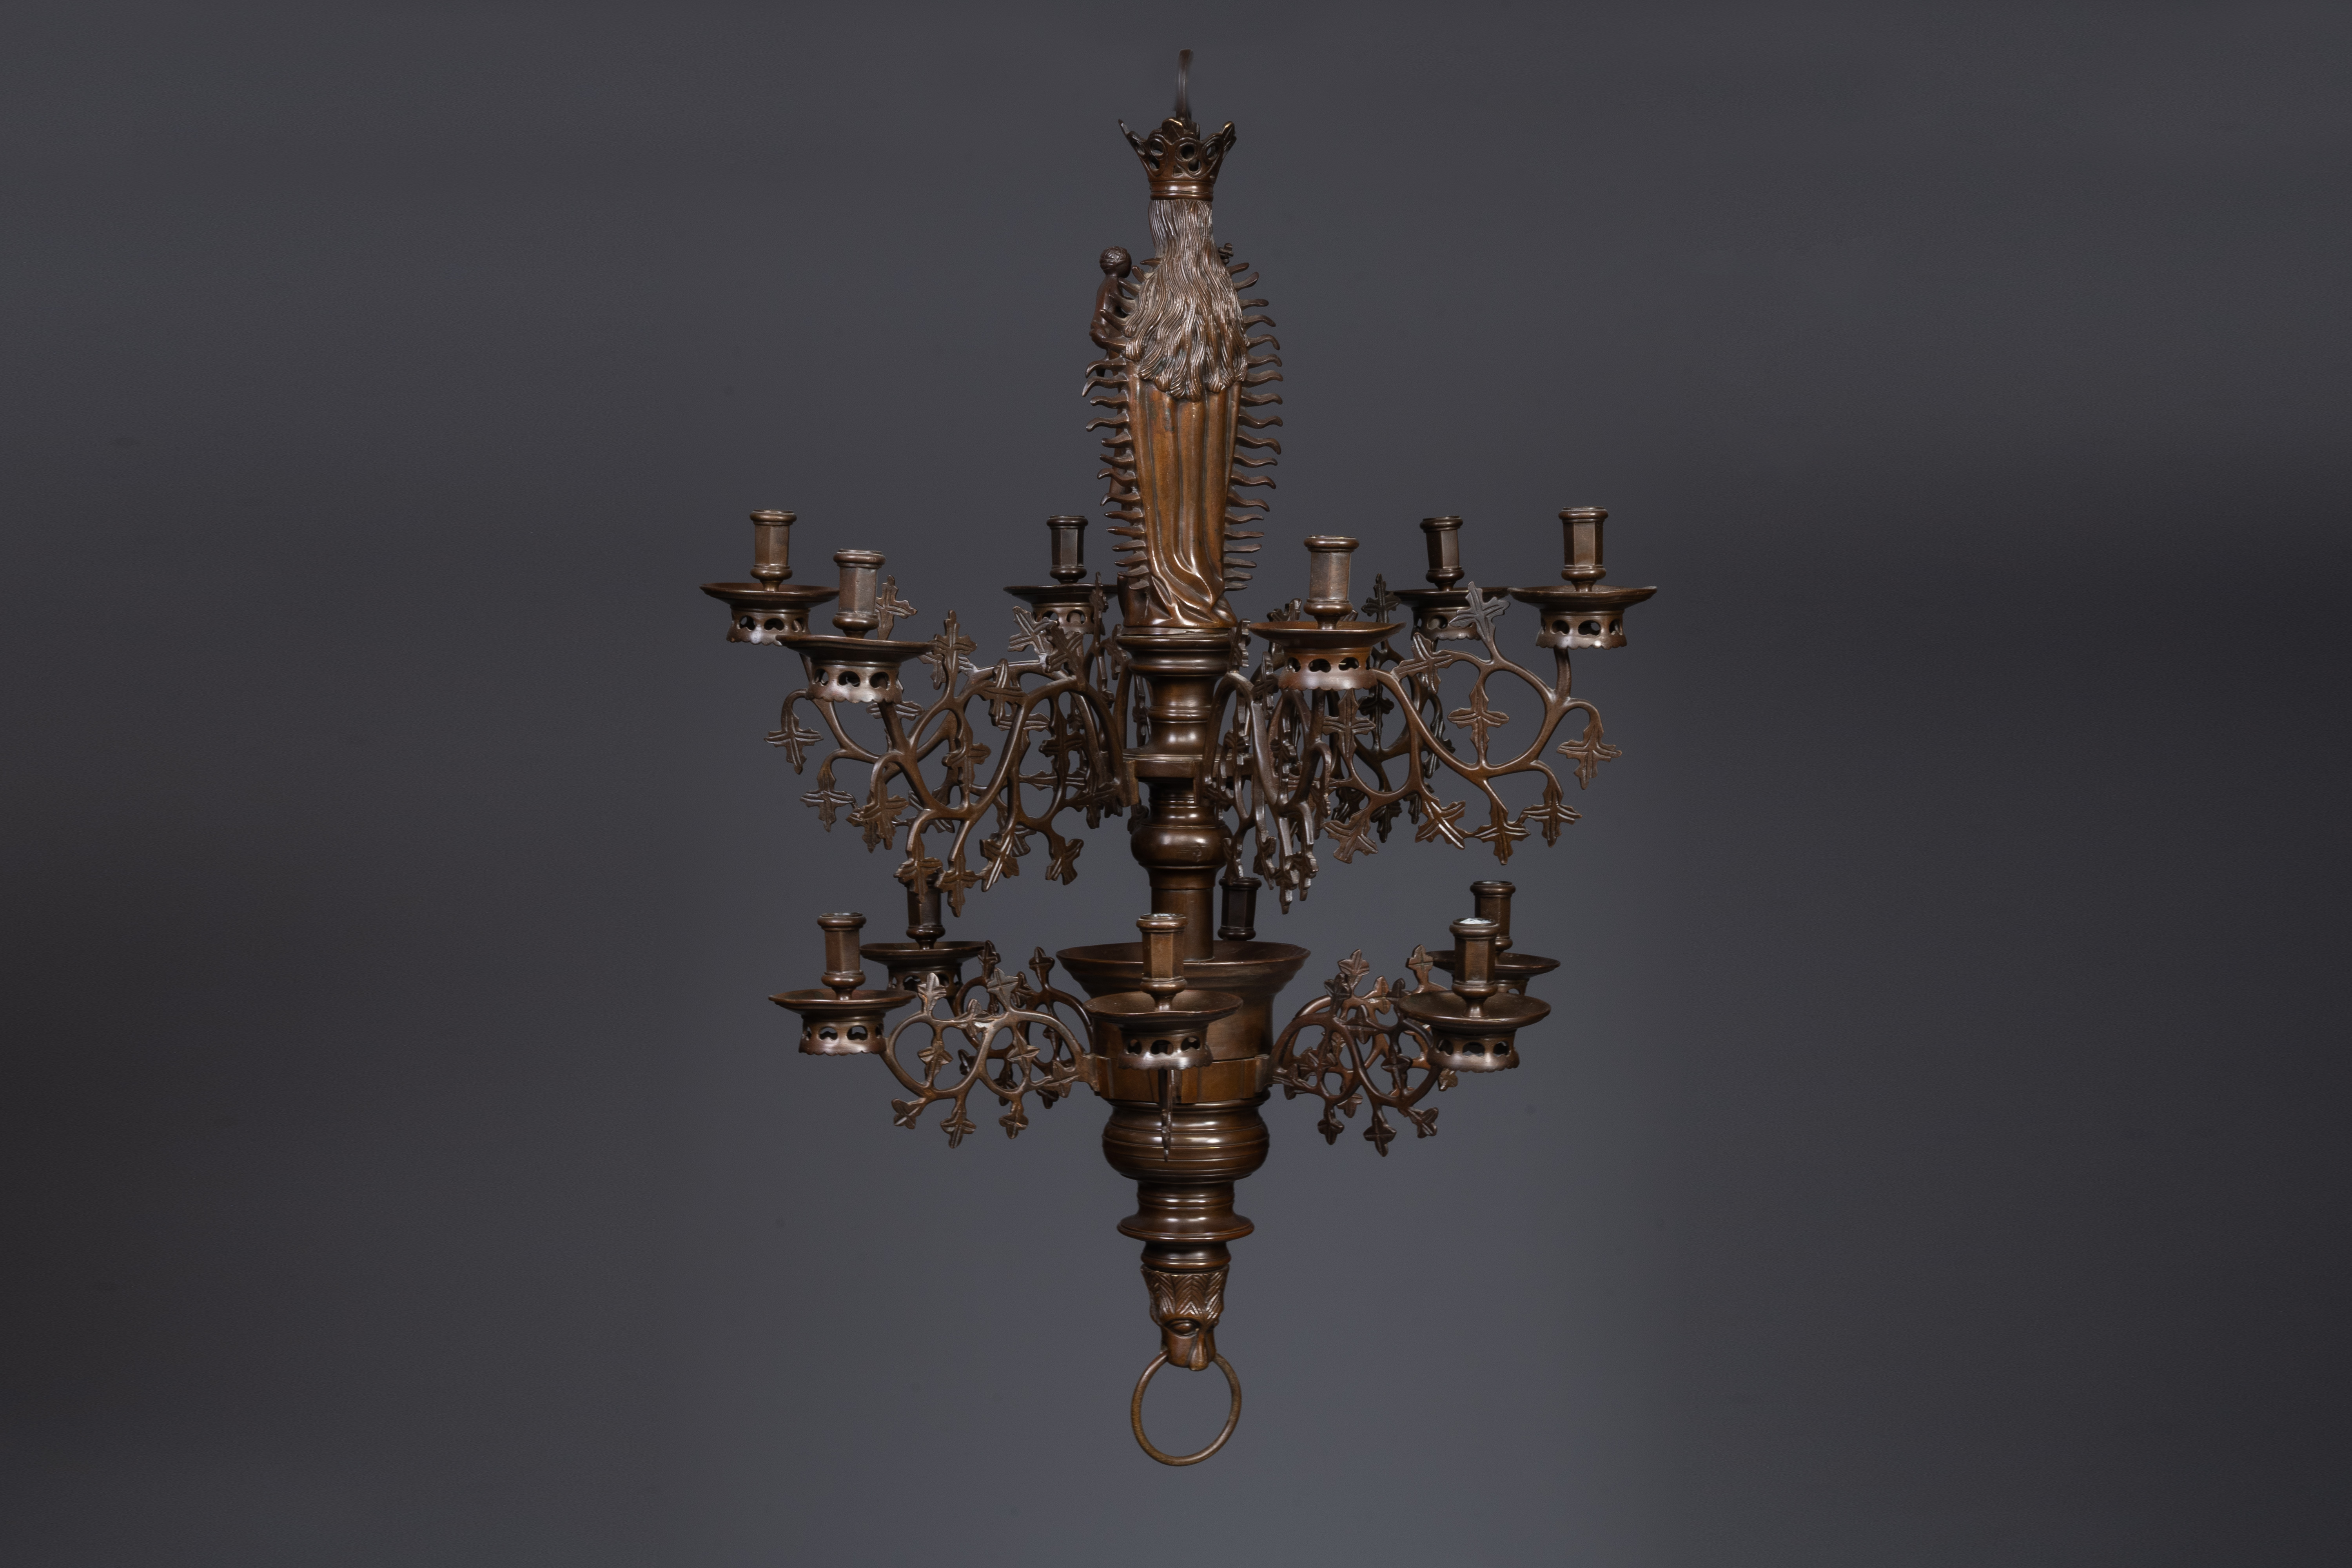 A Flemish or Dutch bronze Gothic Revival large bronze 'Madonna and Child' chandelier, 19th C. - Image 2 of 8